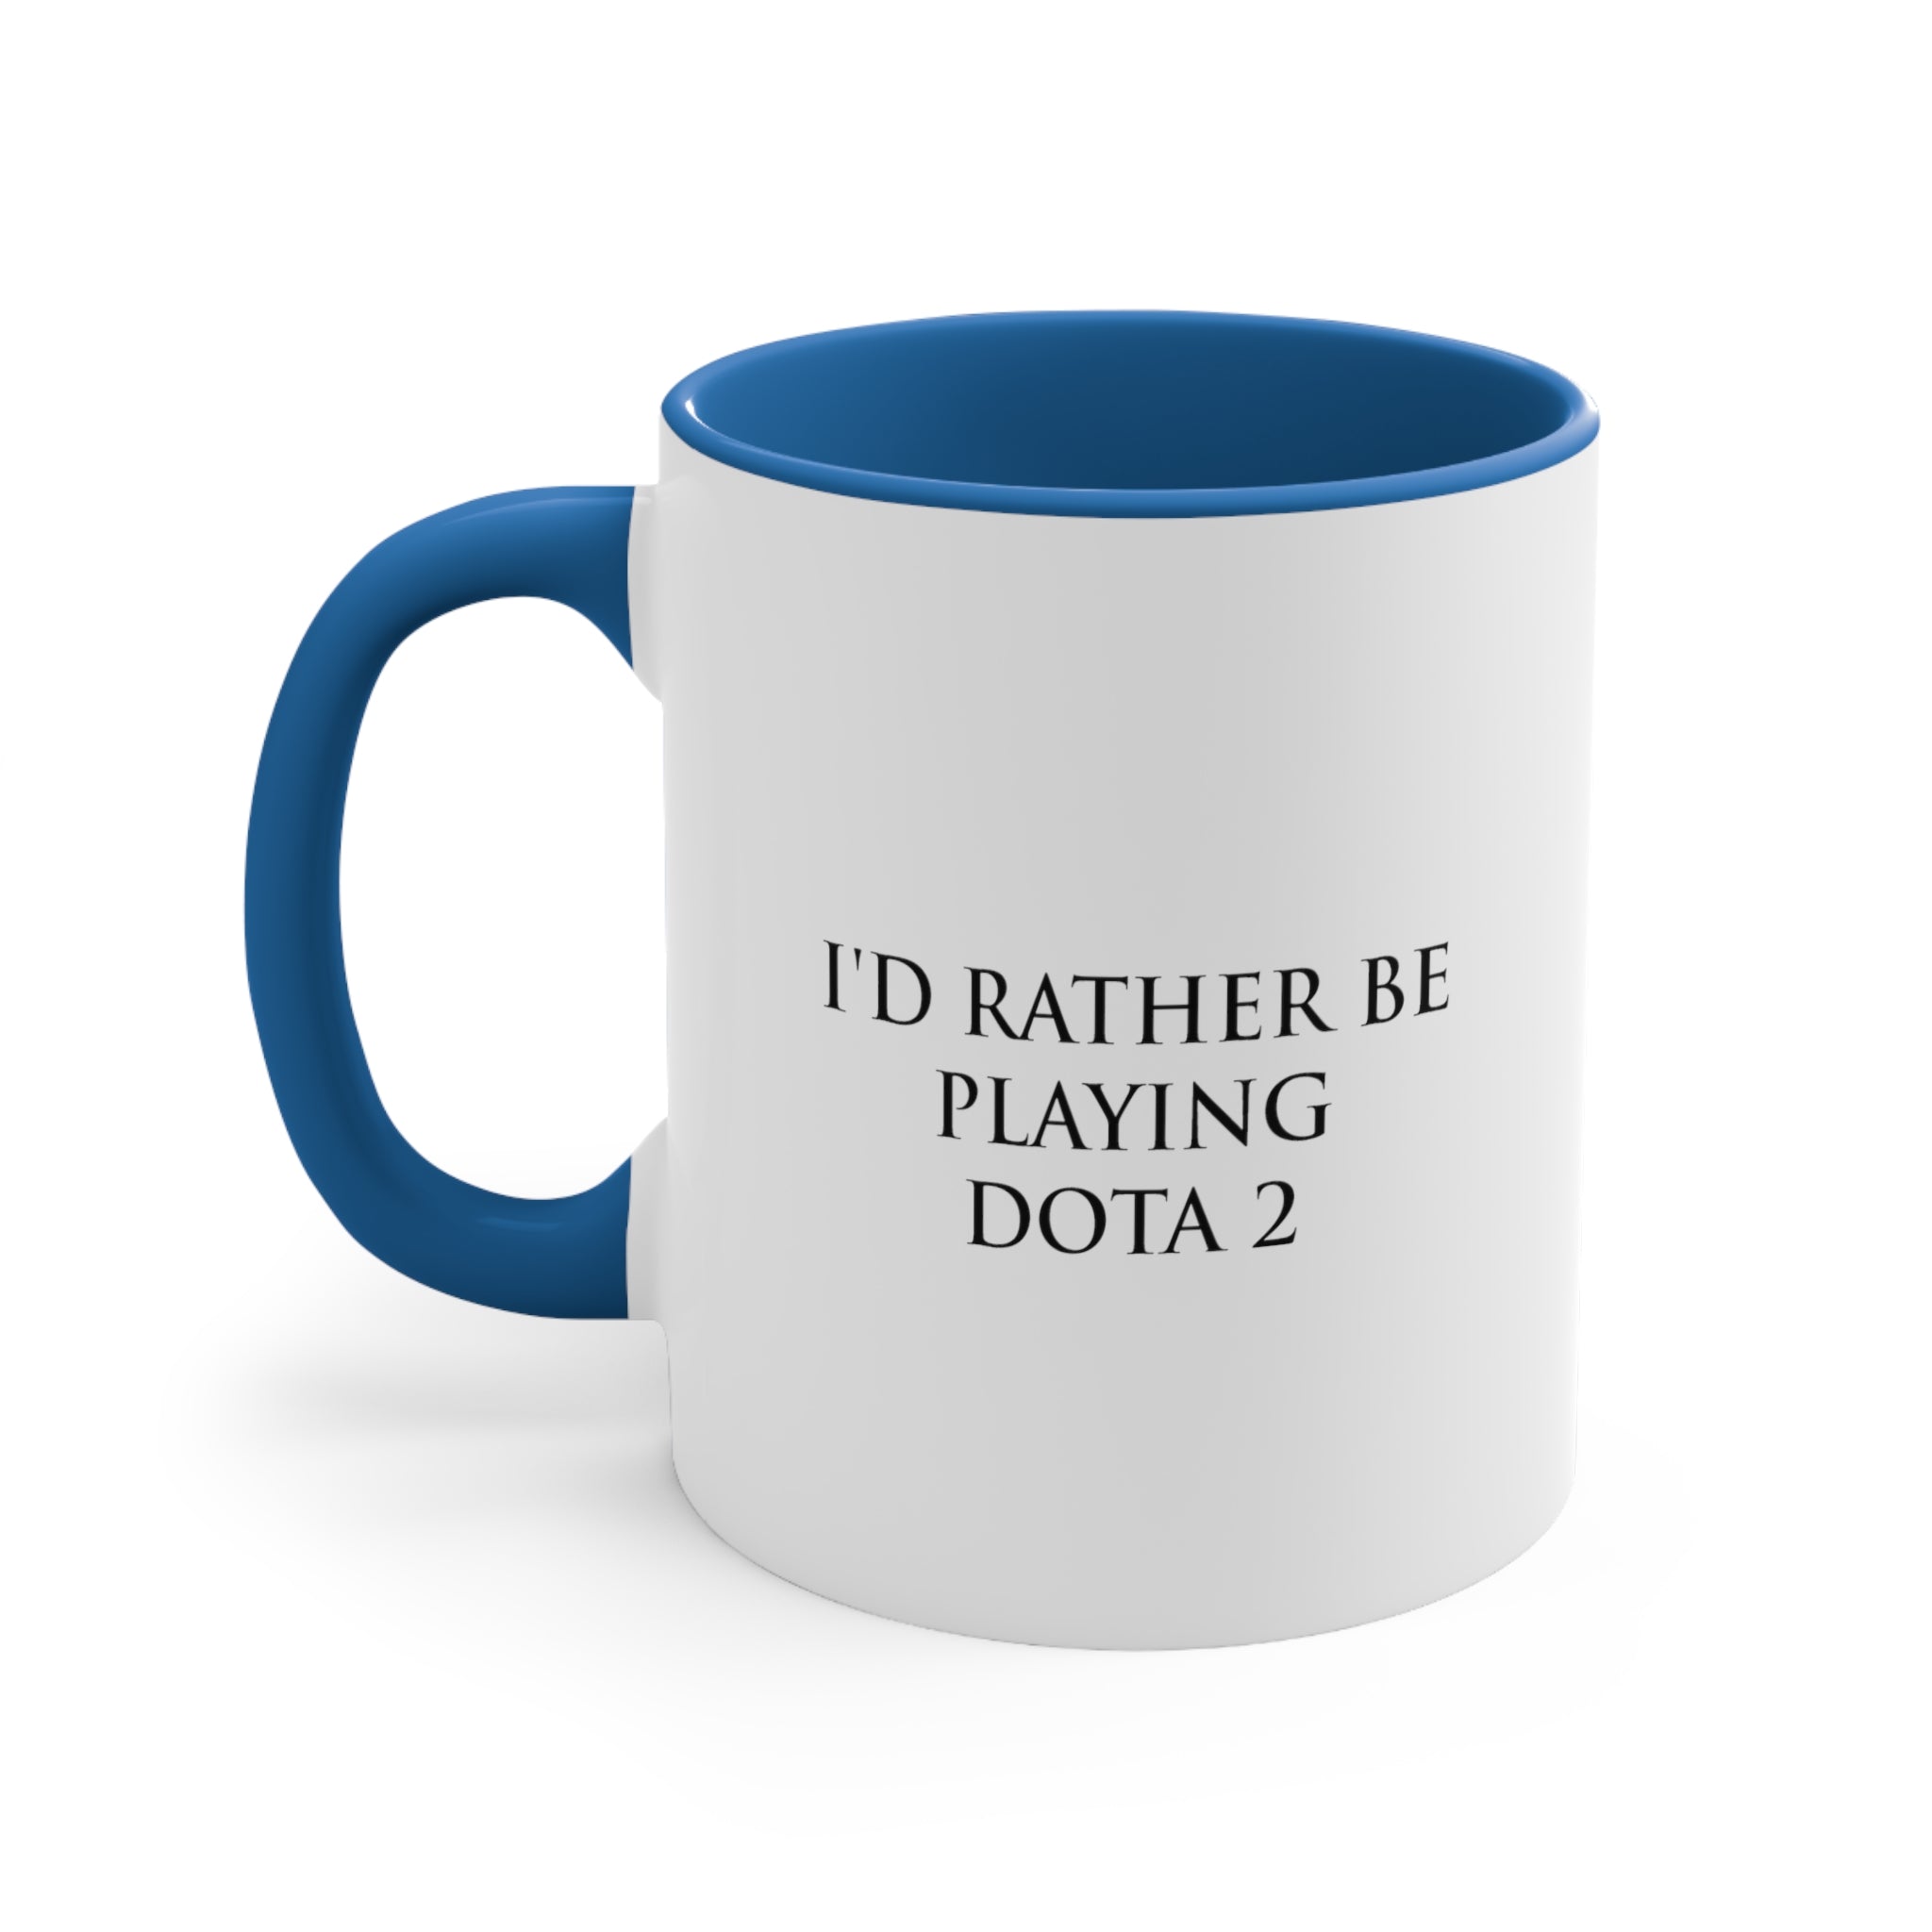 Dota 2 I'd Rather Be Playing Coffee Mug, 11oz Cups Mugs Cup Gamer Gift For Him Her Game Cup Cups Mugs Birthday Christmas Valentine's Anniversary Gifts